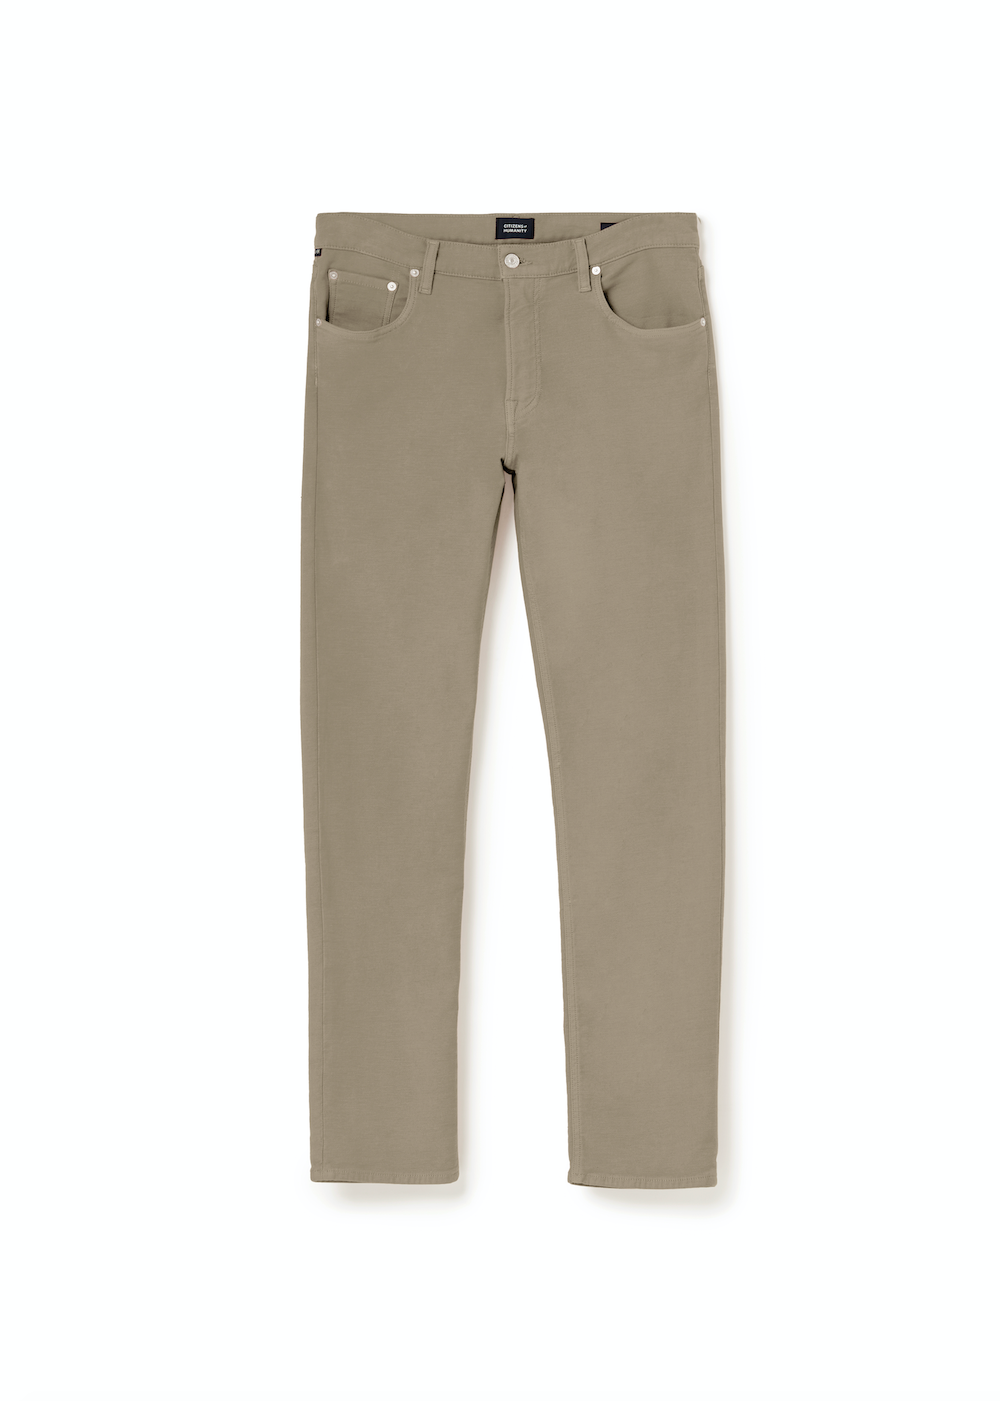 Adler Tapered Classic Pant - Abbot - Citizens of Humanity - Danali